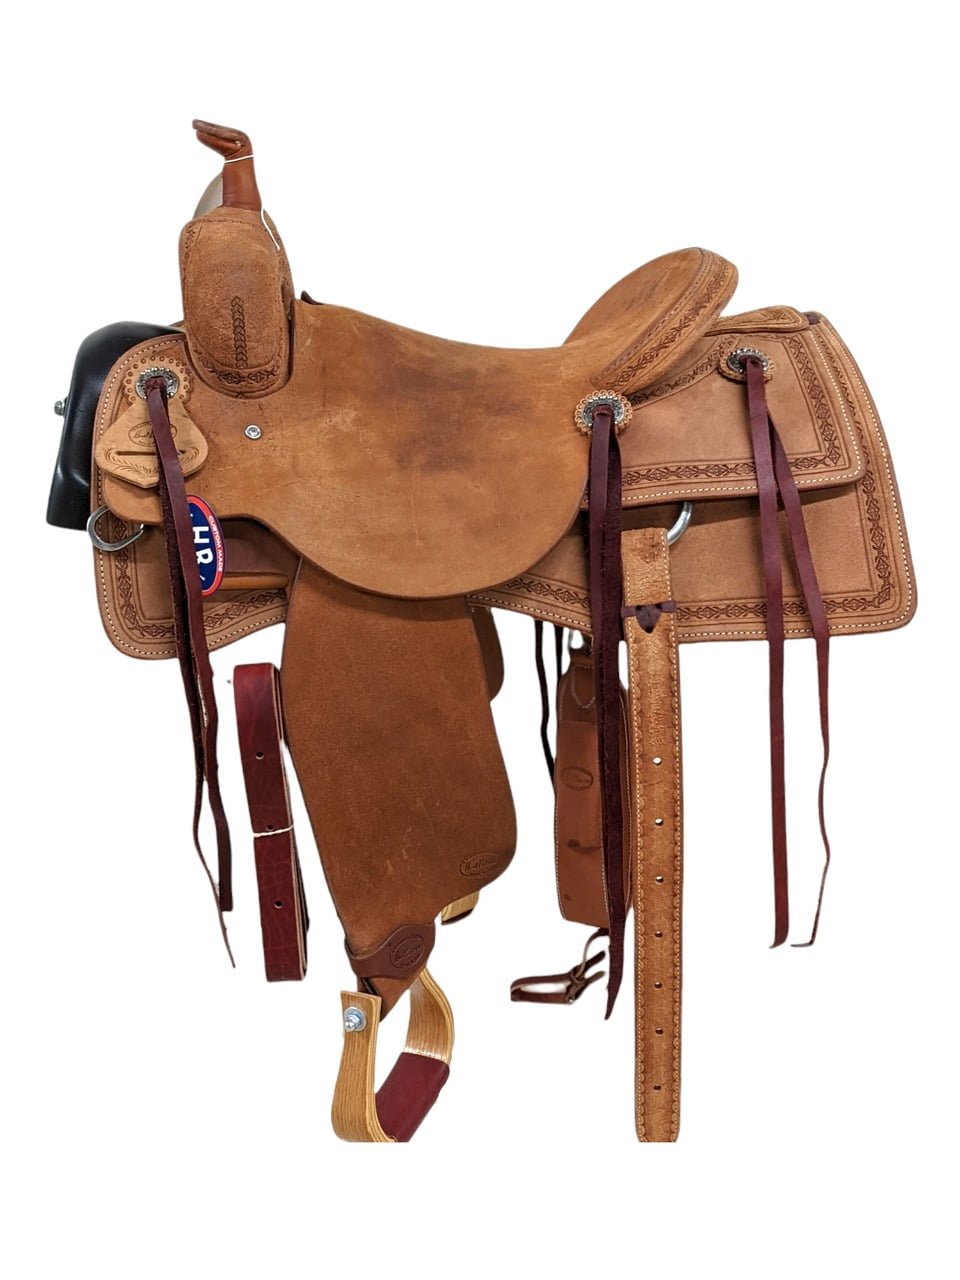 This HR Saddlery ranch cutting saddle is a stunner. This all-roughout saddle is simple which allows the diamond and barbed wire border tooling to pop! This saddle has two large, square skirts and saddle strings to keep the rider's gear close at hand. The saddle features a rough-out seat, seat jockey and fenders. This saddle's off-billet complements the saddle's light rough-out perfectly. Weight: Approx. 34 lbs Gullet: 7" mid-concho to mid concho Finished Seat Size: 15.5" Skirt Length: 27.5" Tree Size: 16"